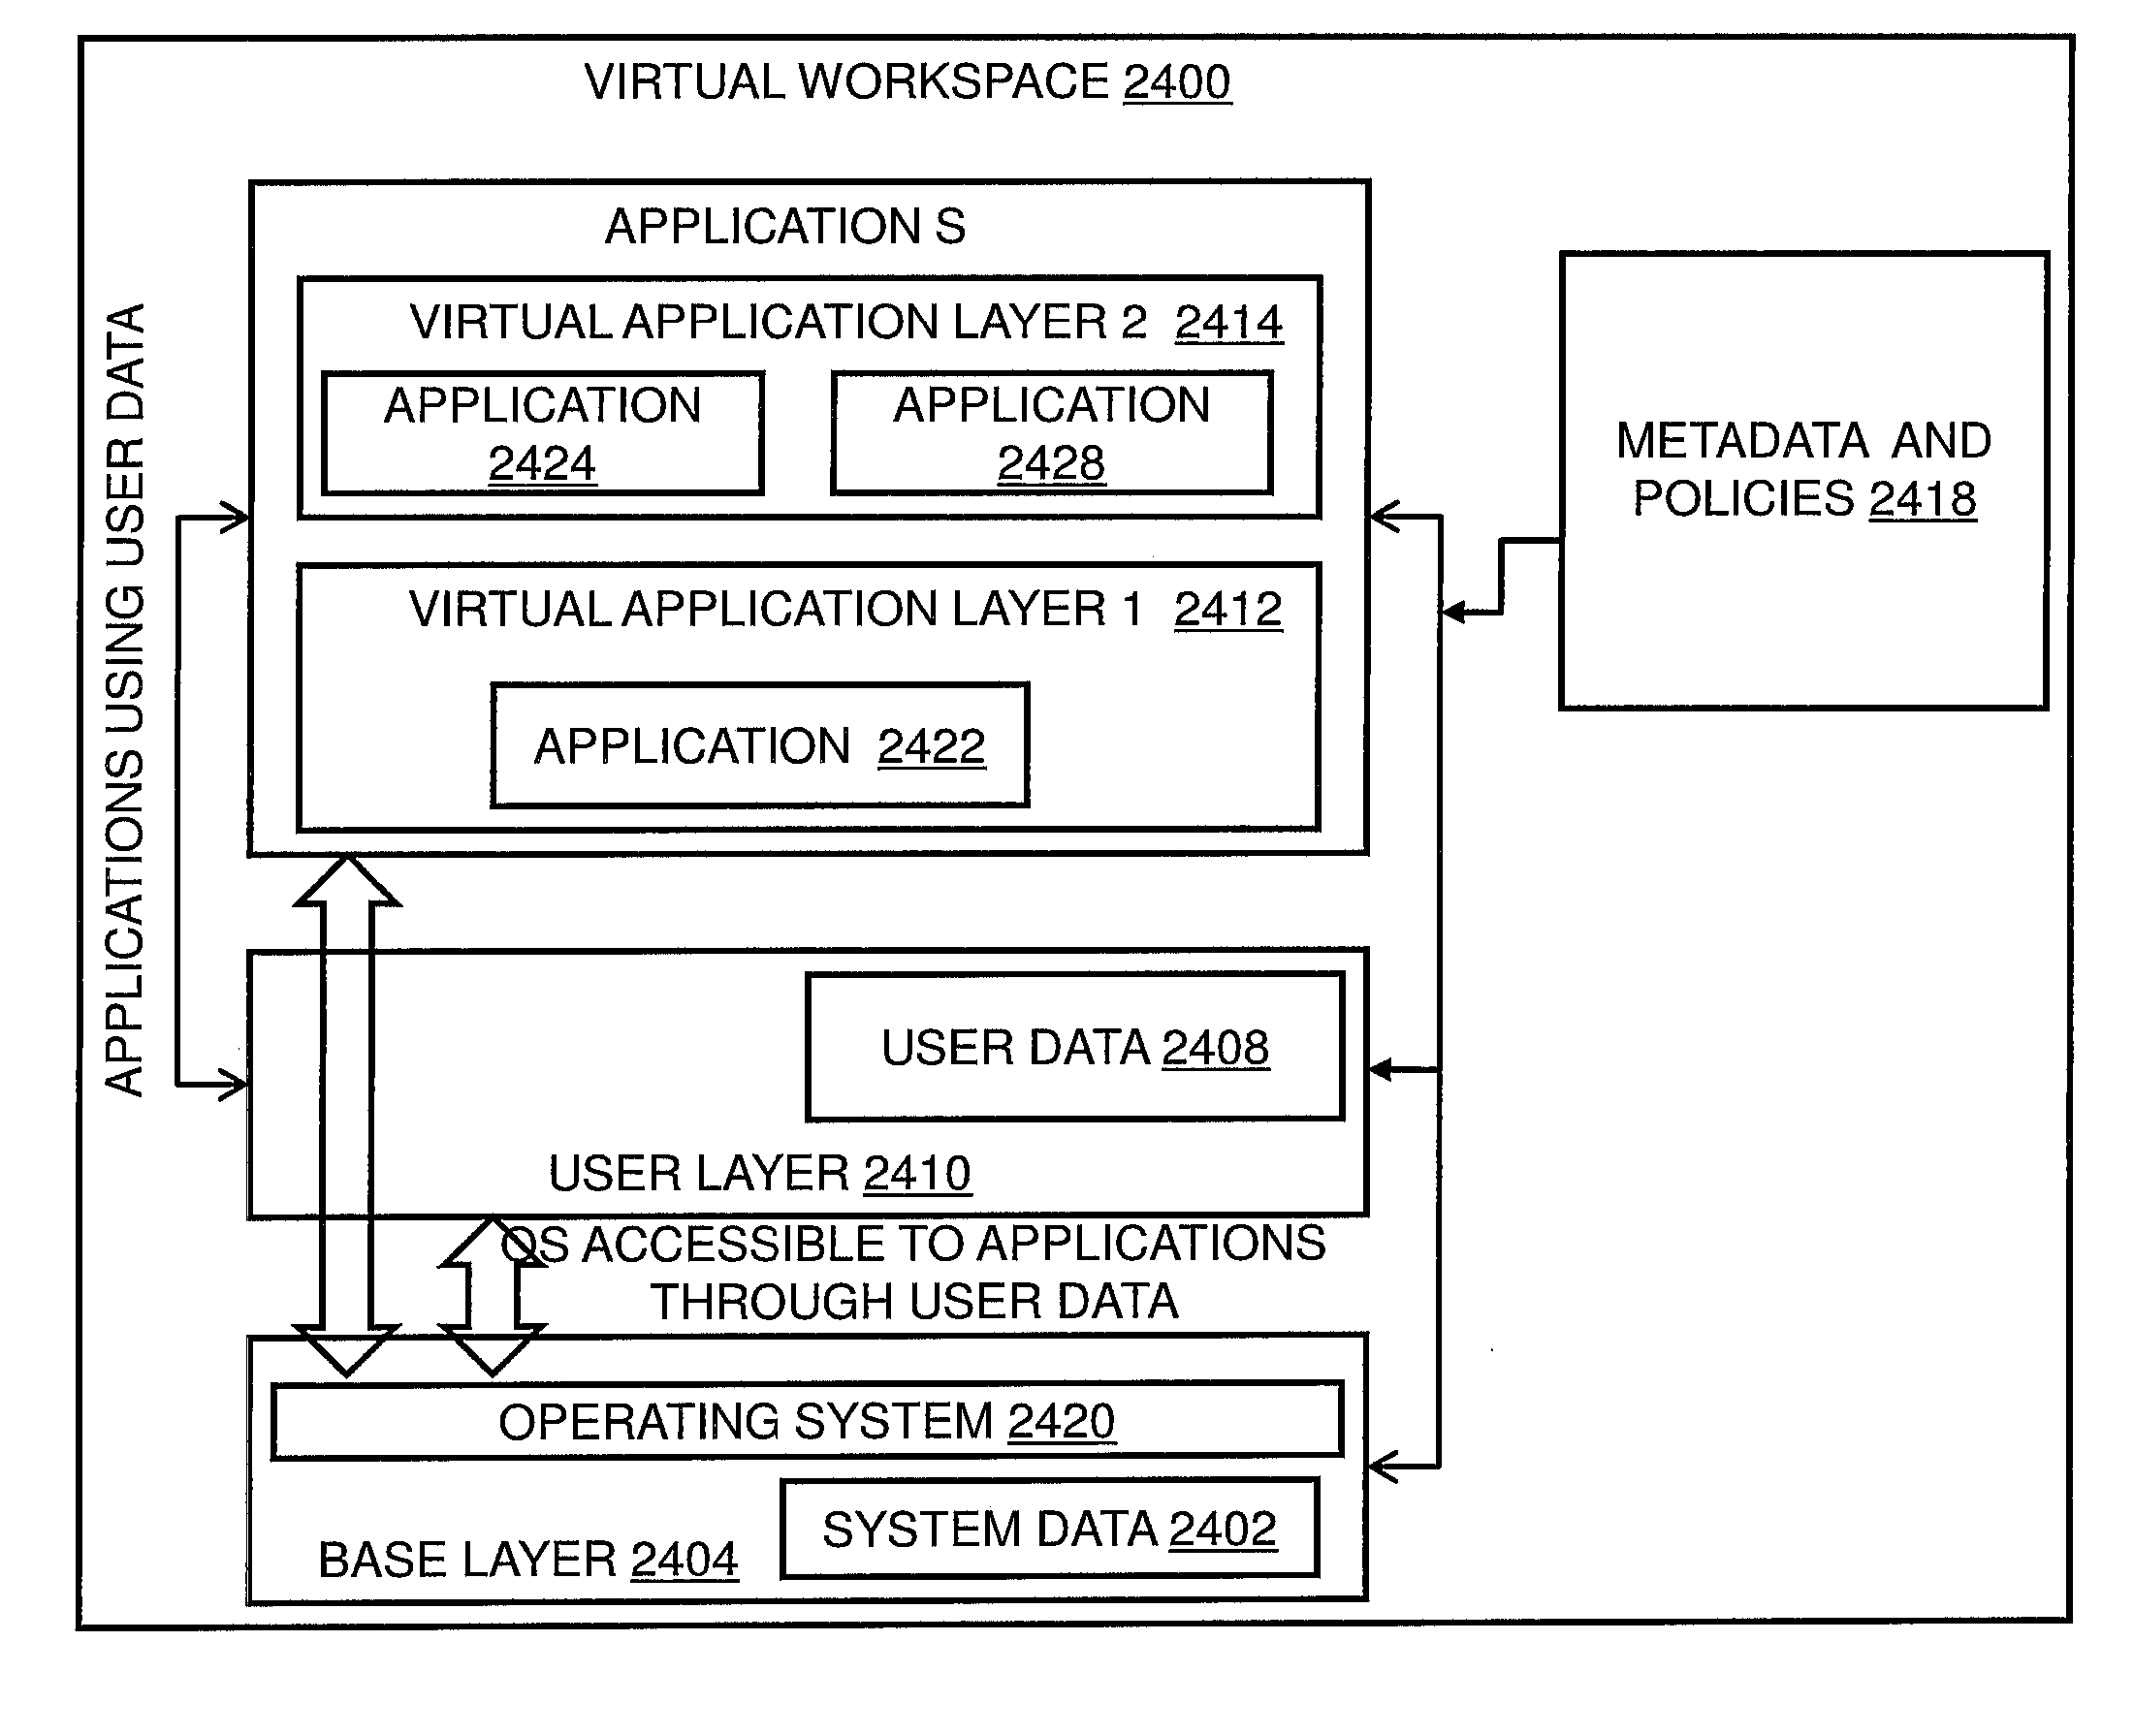 Operating Systems in a Layerd Virtual Workspace